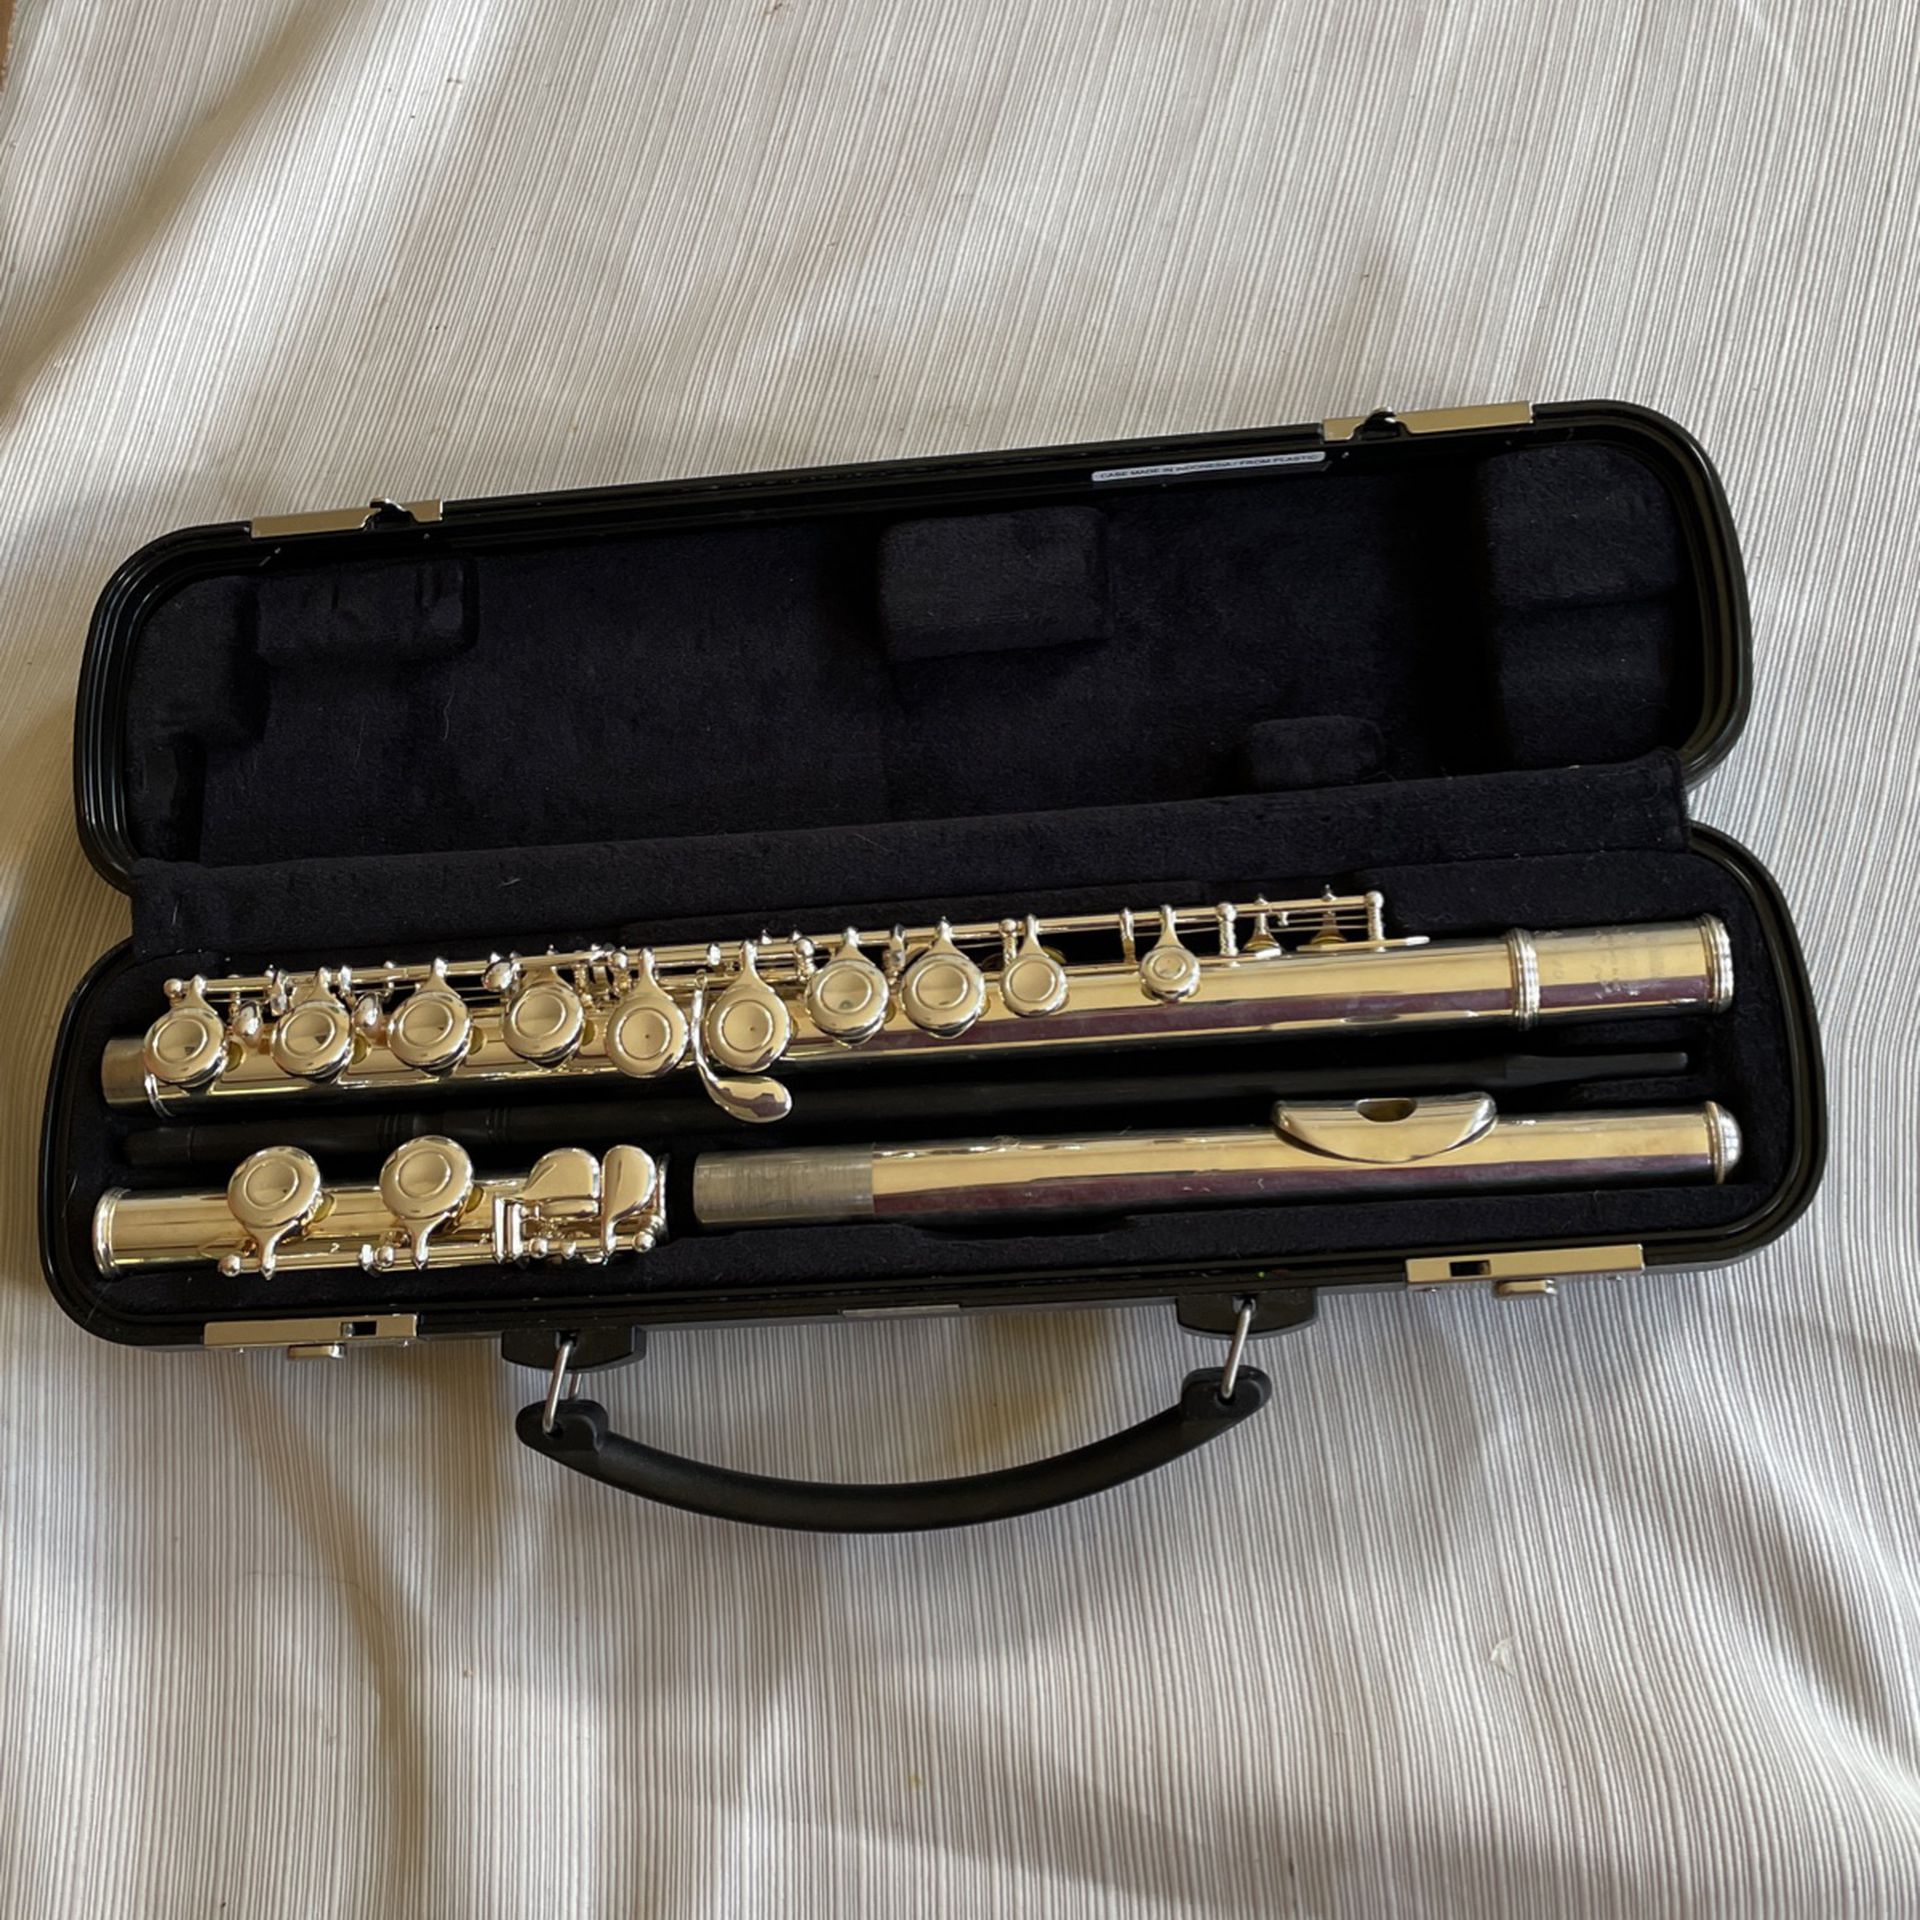 Yamaha Advantage 200AD Flute with carrying case